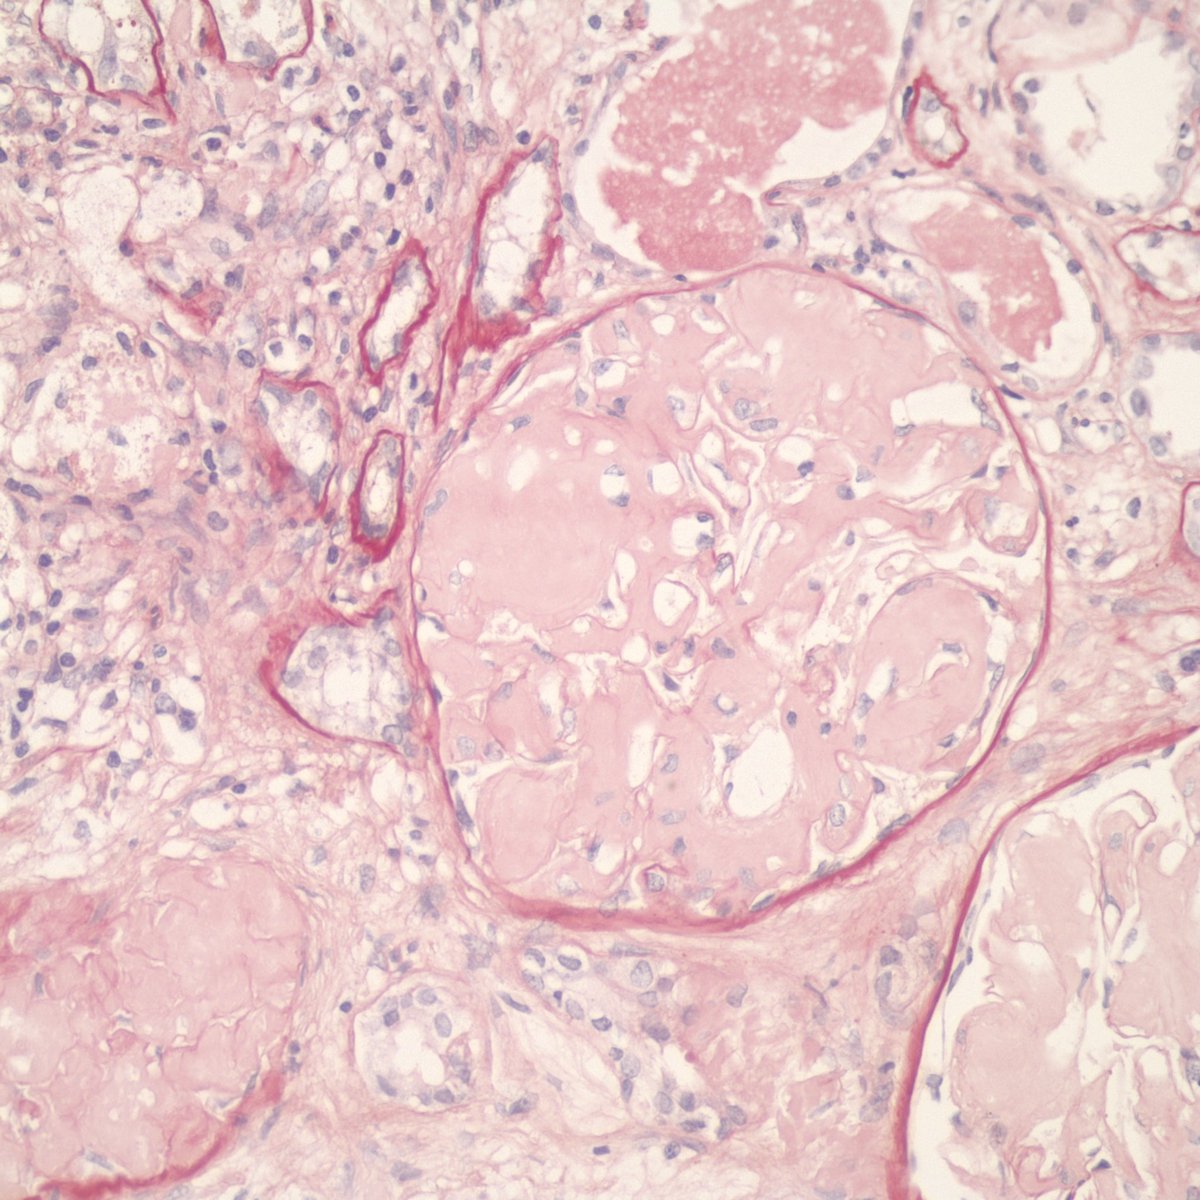 Amyloidosis in the kidney is interesting, not only does it affect the vessels, but it also involves the glomerulus. The amorphic appearance gives the diagnosis away. #surgpath #pathX #pathtwitter #pathology #pathologists #amyloidosis #kidney #nephropathology #nephrology